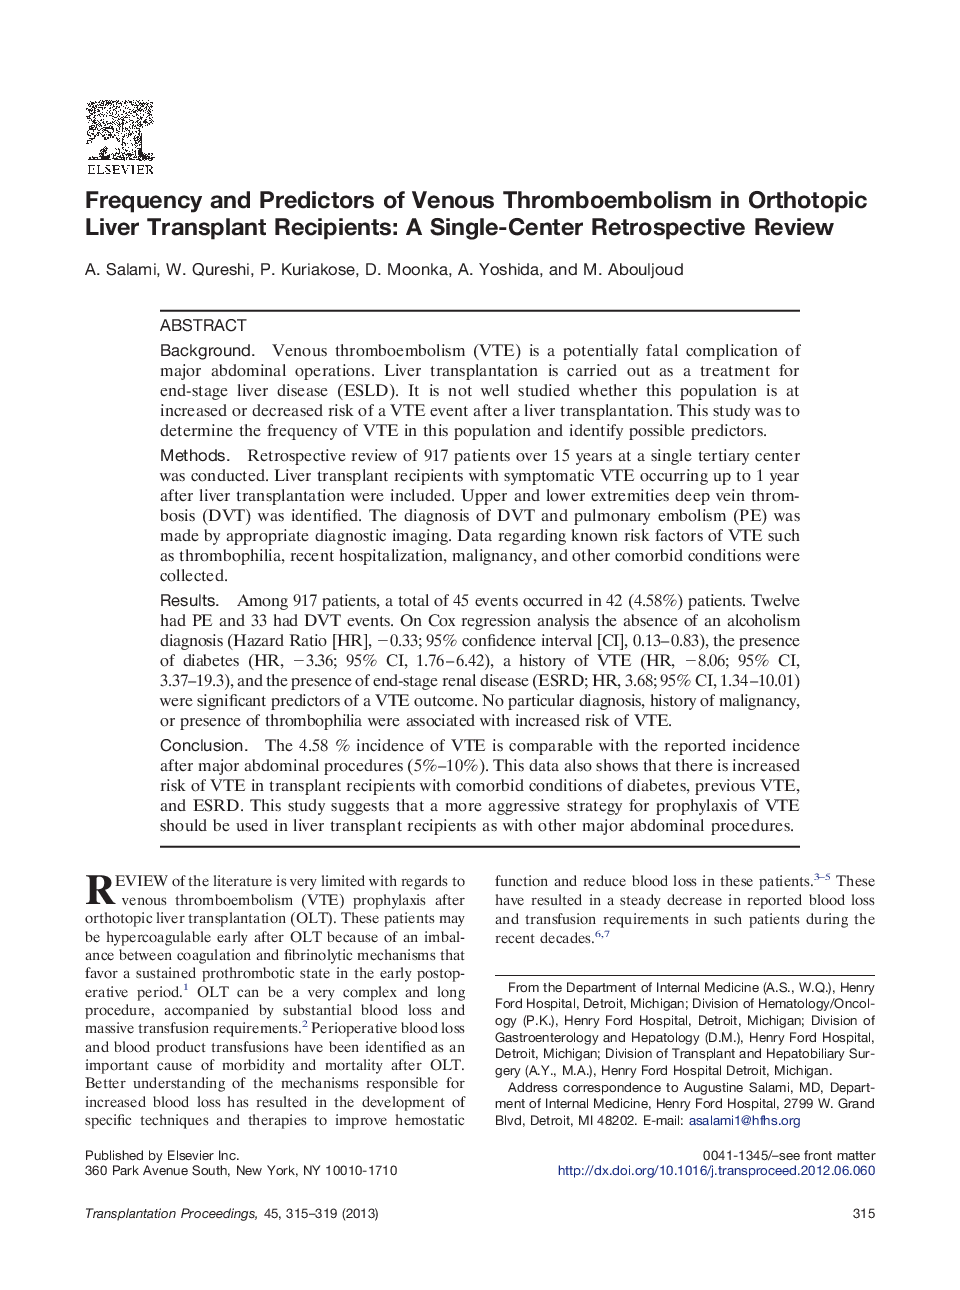 Frequency and Predictors of Venous Thromboembolism in Orthotopic Liver Transplant Recipients: A Single-Center Retrospective Review